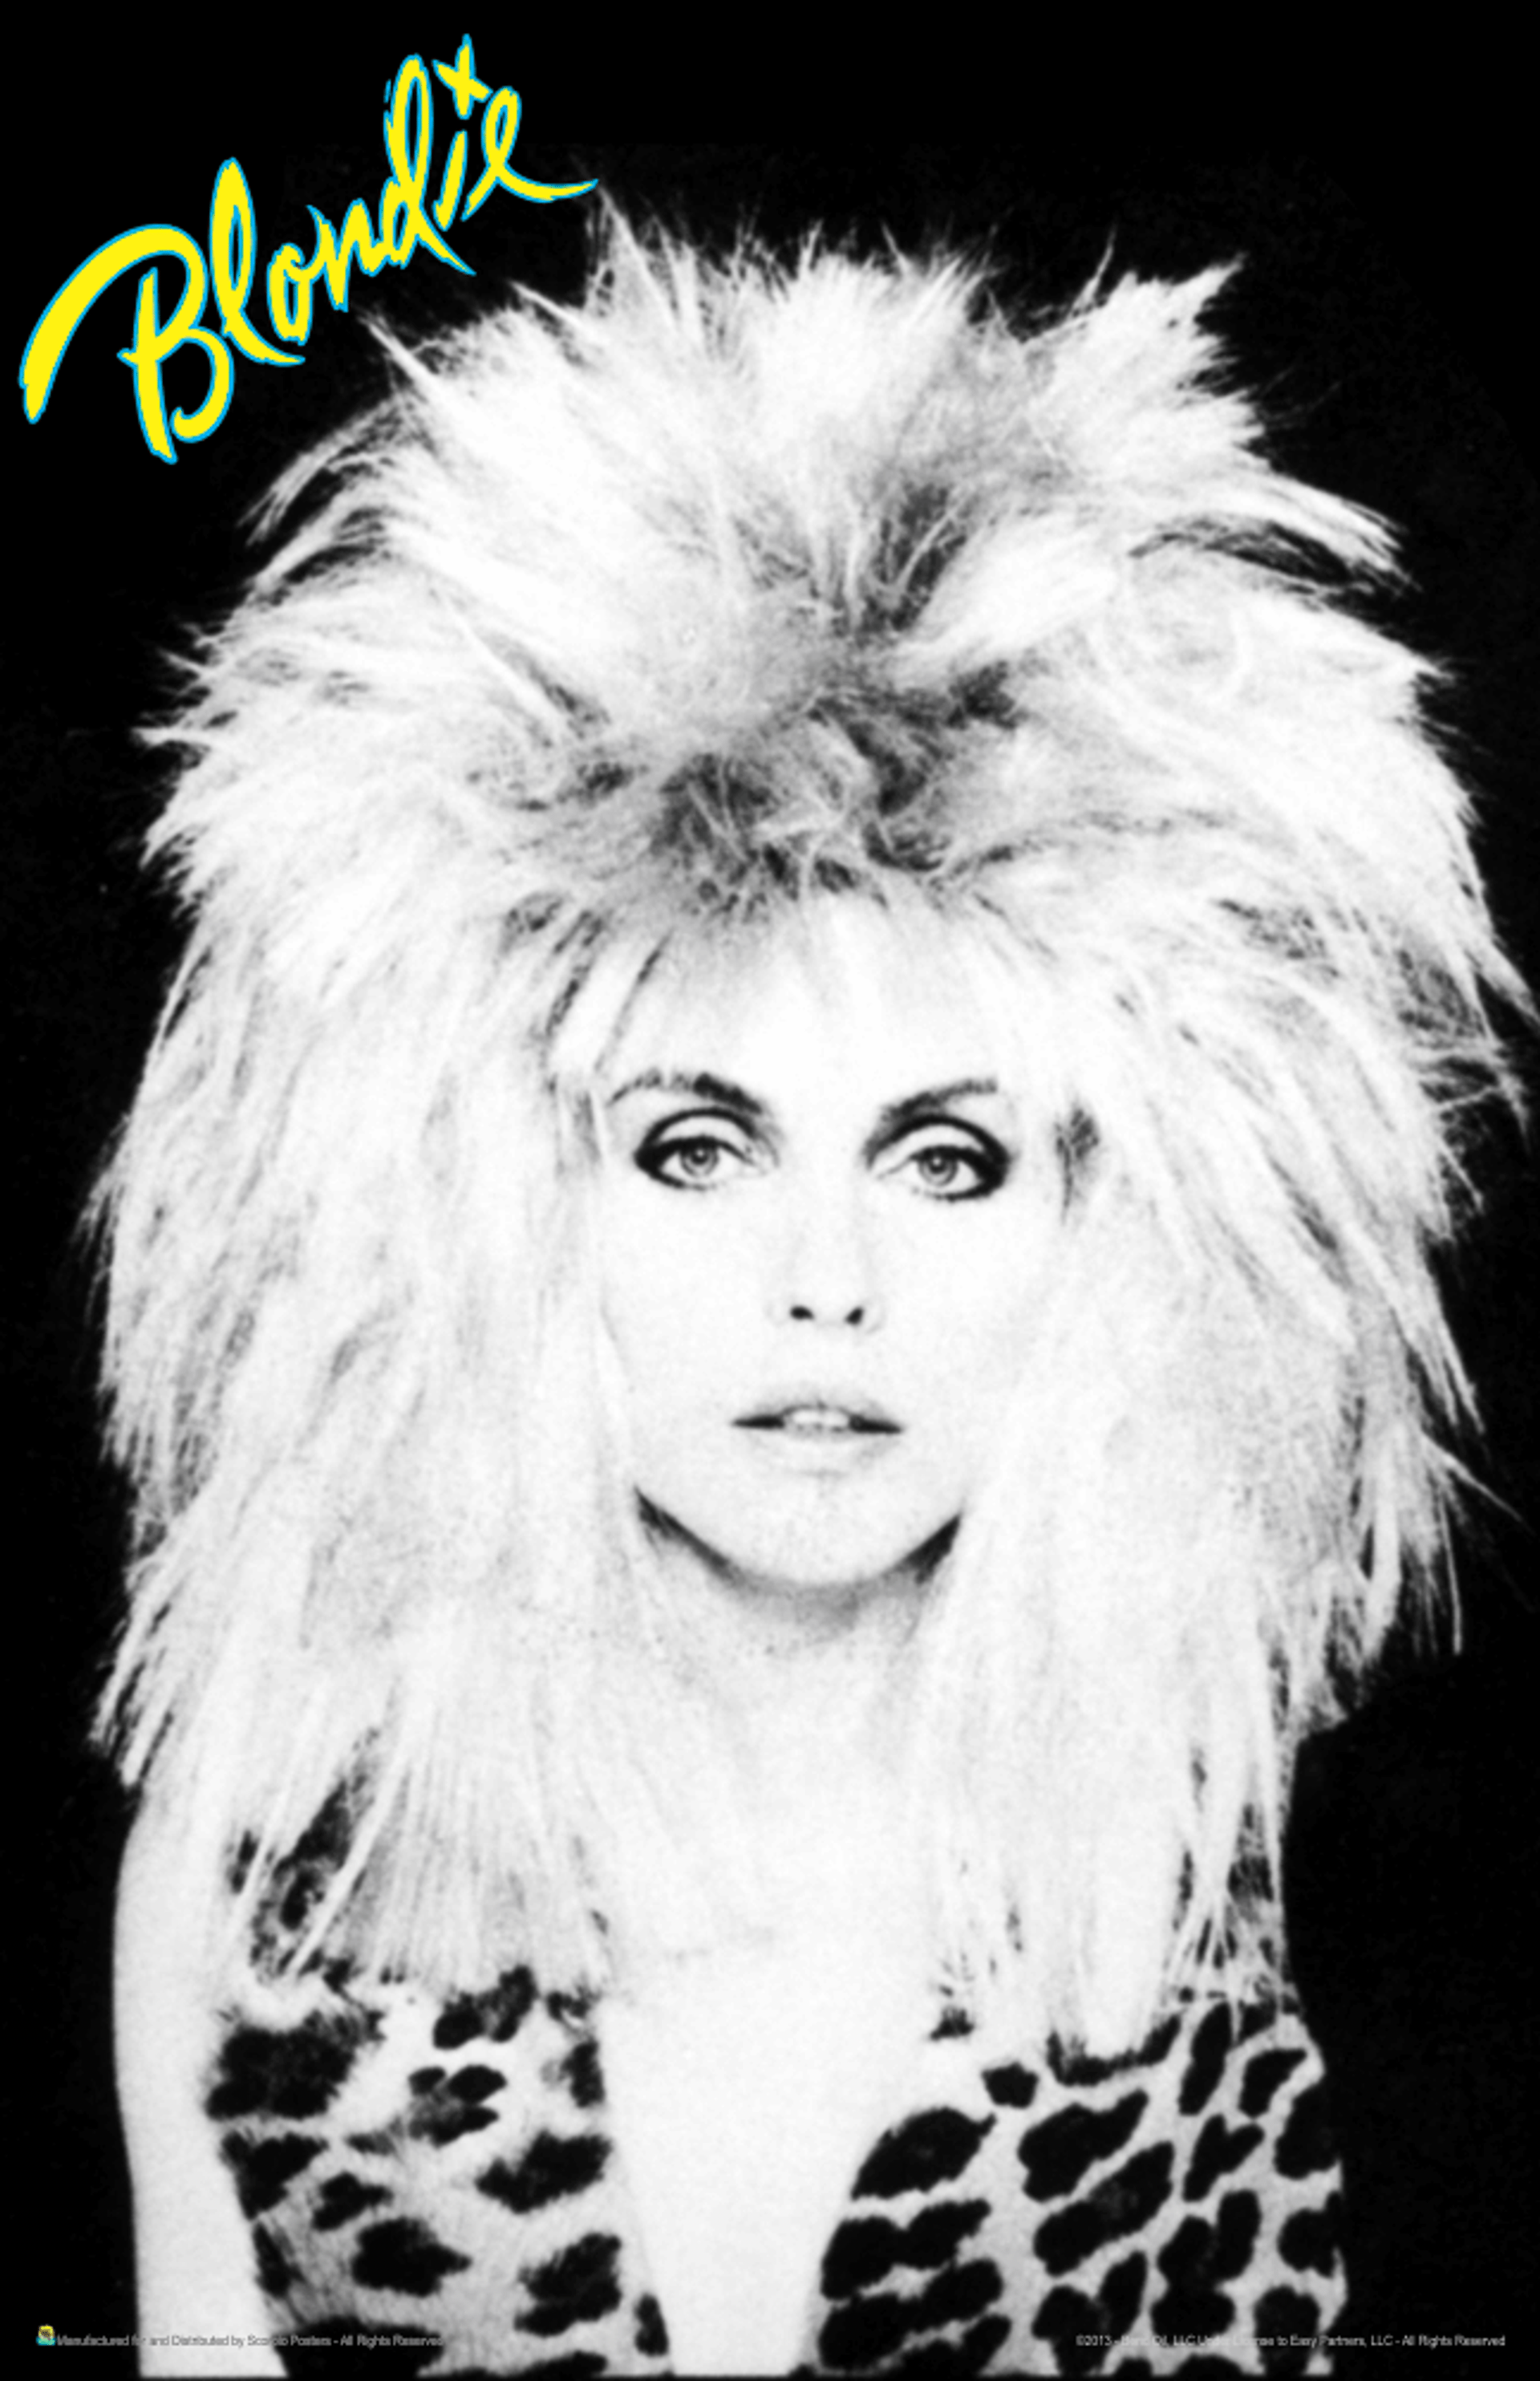 Blondie Black And White Debbie Harry Big Hair With Logo Mini Poster 11 X 17 The Blacklight Zone 